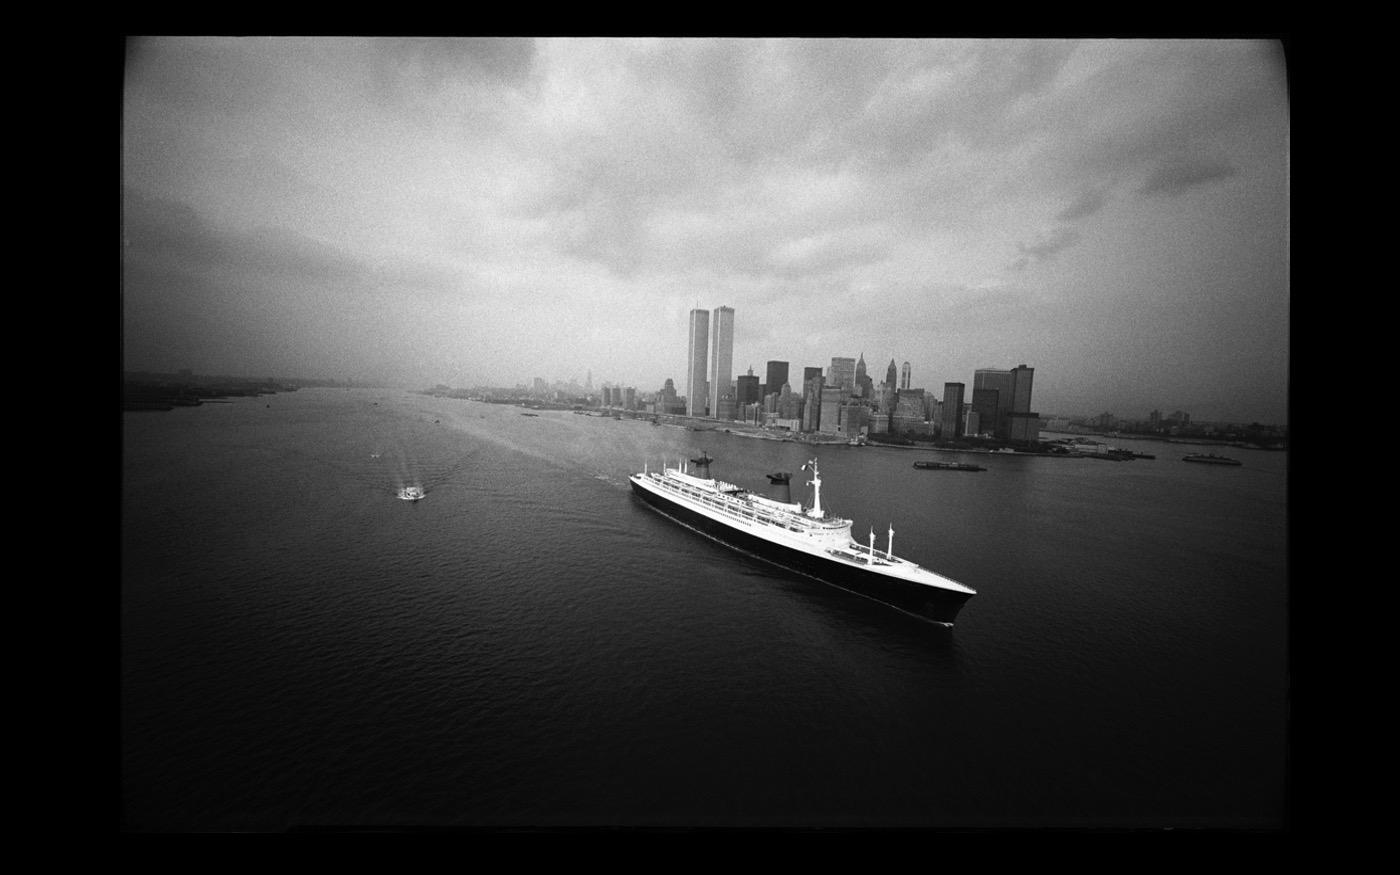 Leaving NY for the last time, the SS France passes by the newly opened World Trade Center towers  1974 : Looking Back: 60 Years of Photographs : David Burnett | Photographer